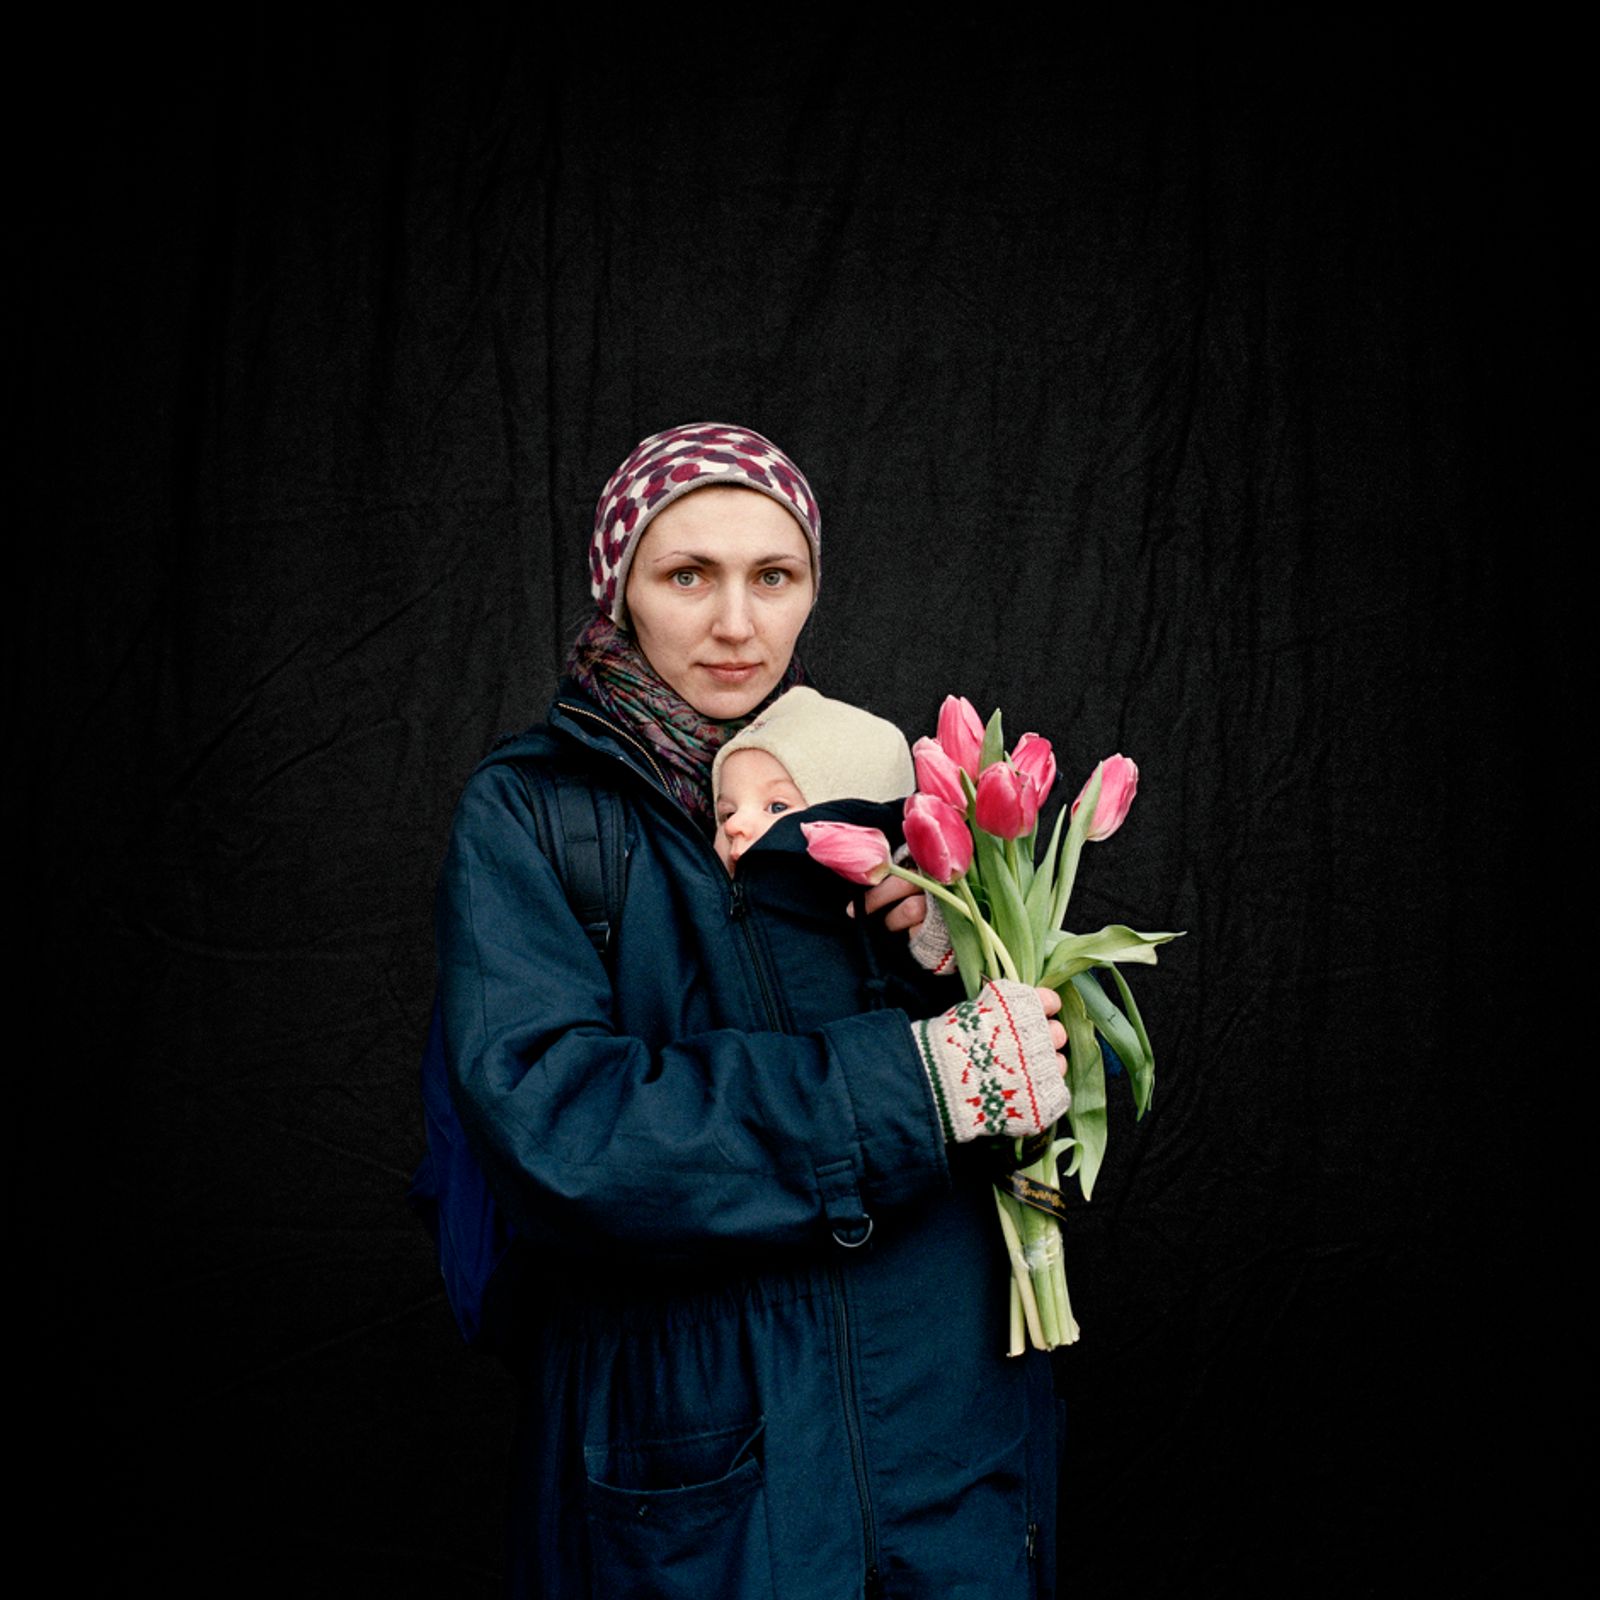 © Anastasia Taylor Lind - Image from the MAIDAN - Portraits from the Black Square photography project